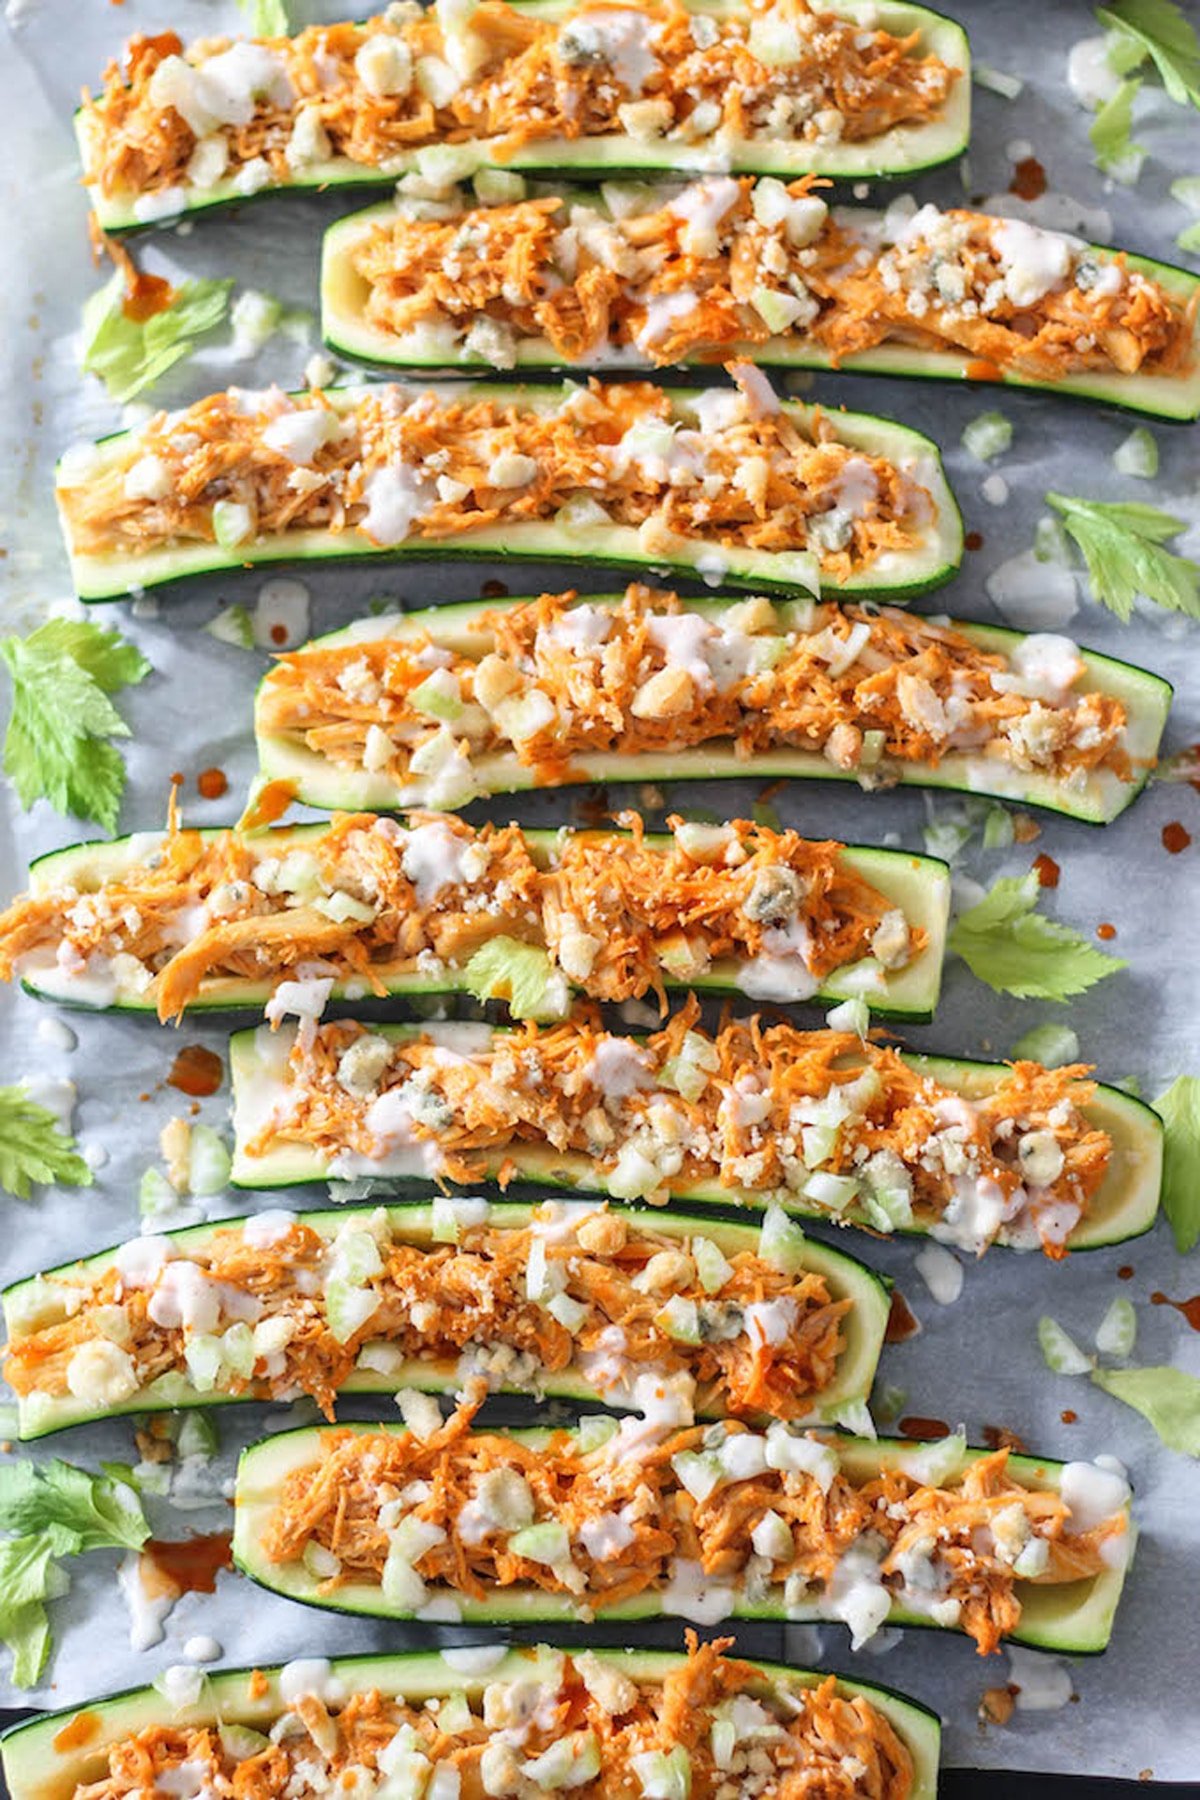 A close up of seven long cut zucchinis with shredded chicken.